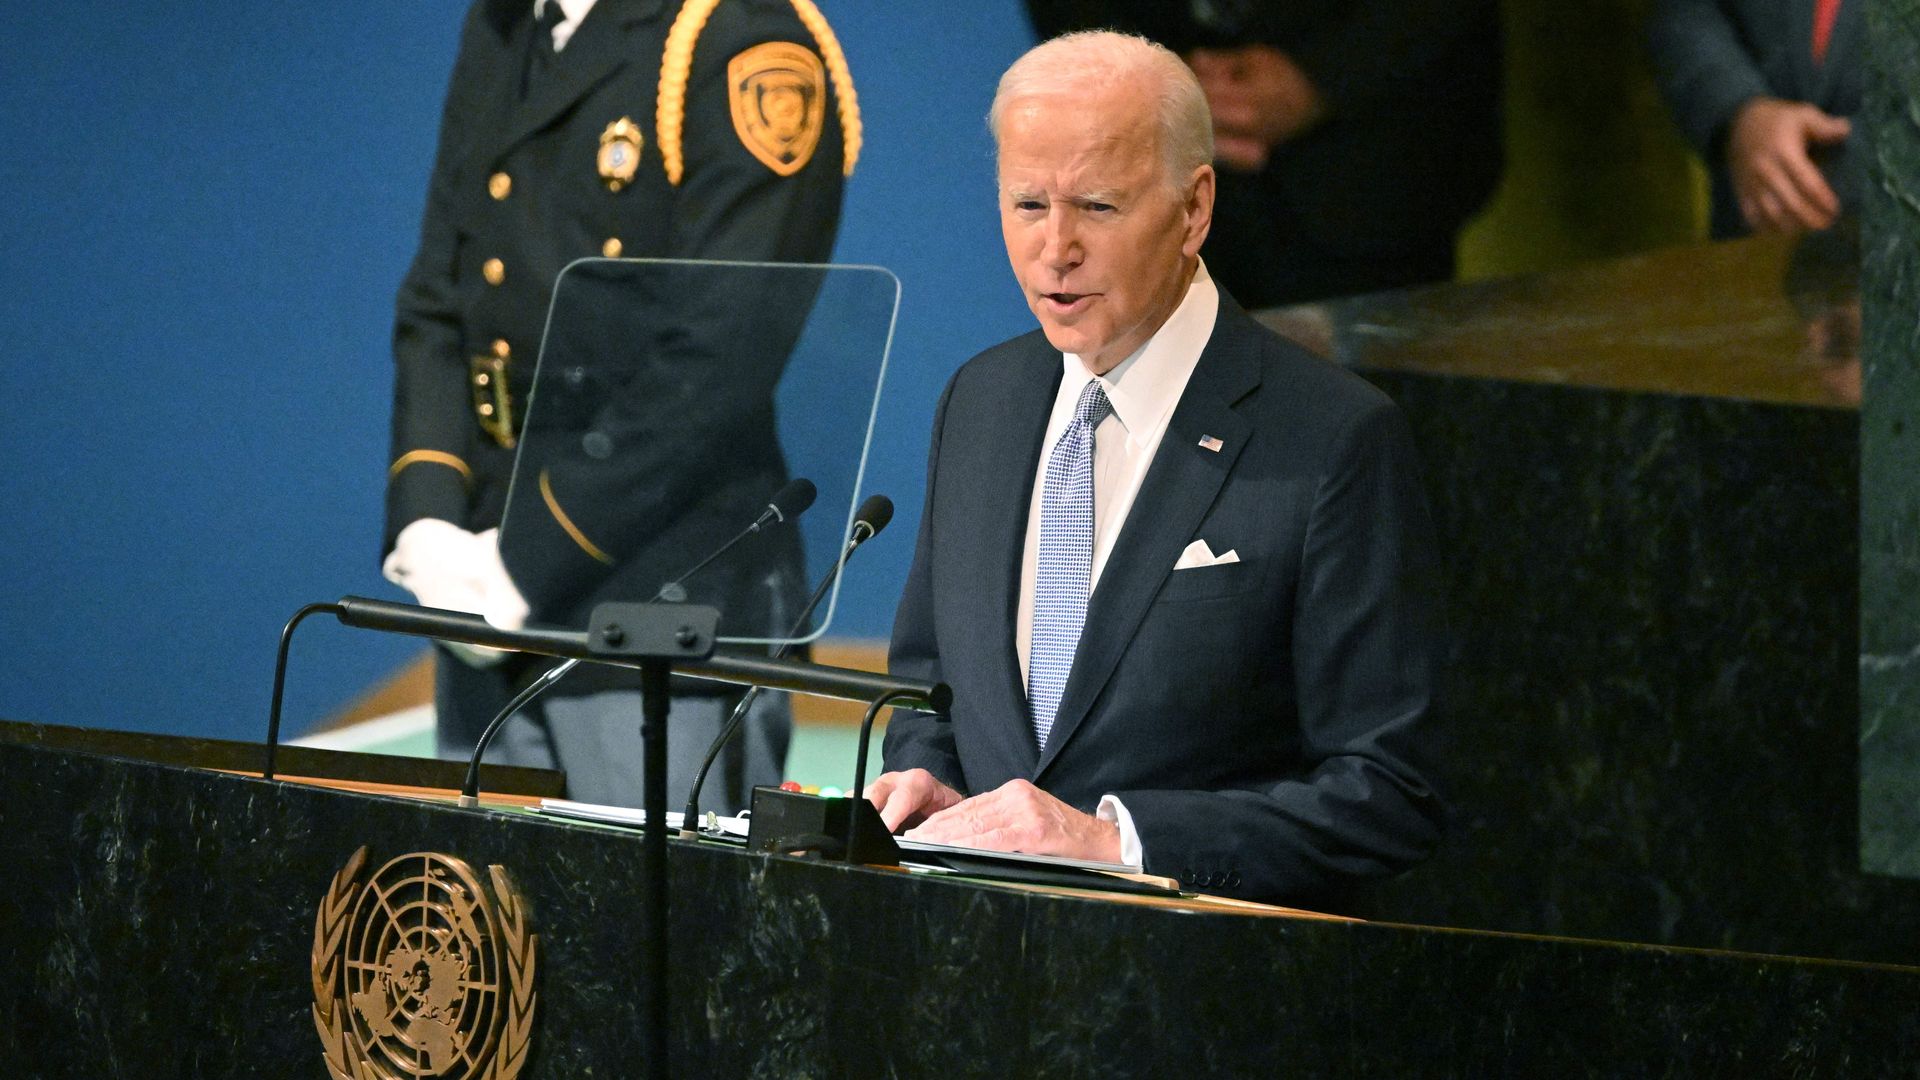 President Biden addressing the 77th session of the United Nations General Assembly